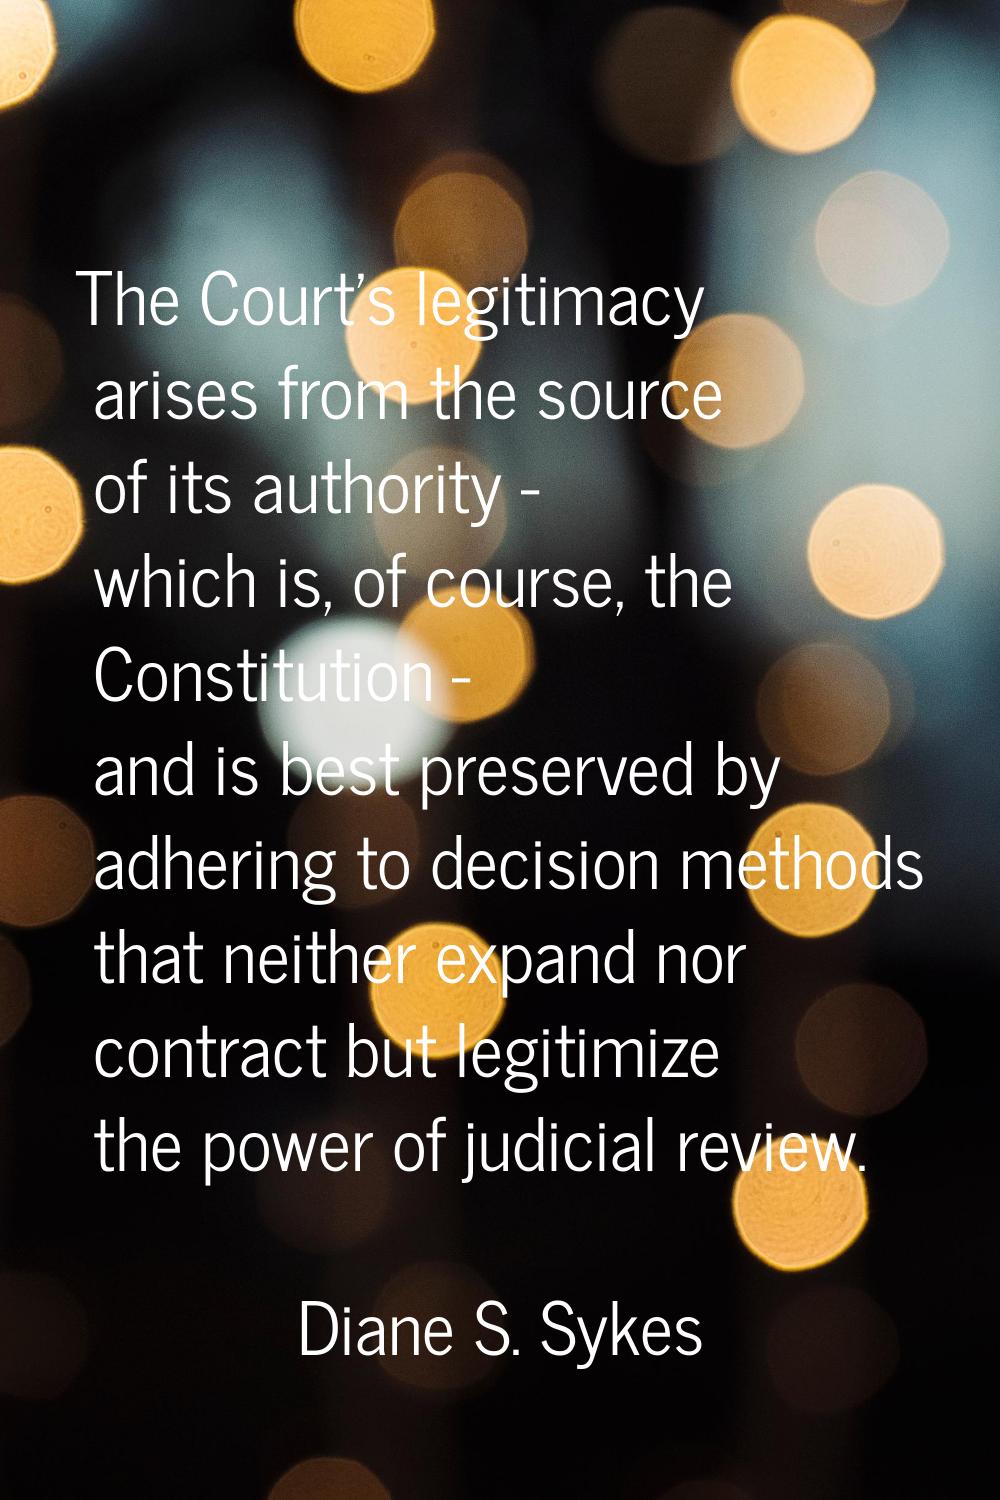 The Court's legitimacy arises from the source of its authority - which is, of course, the Constitut